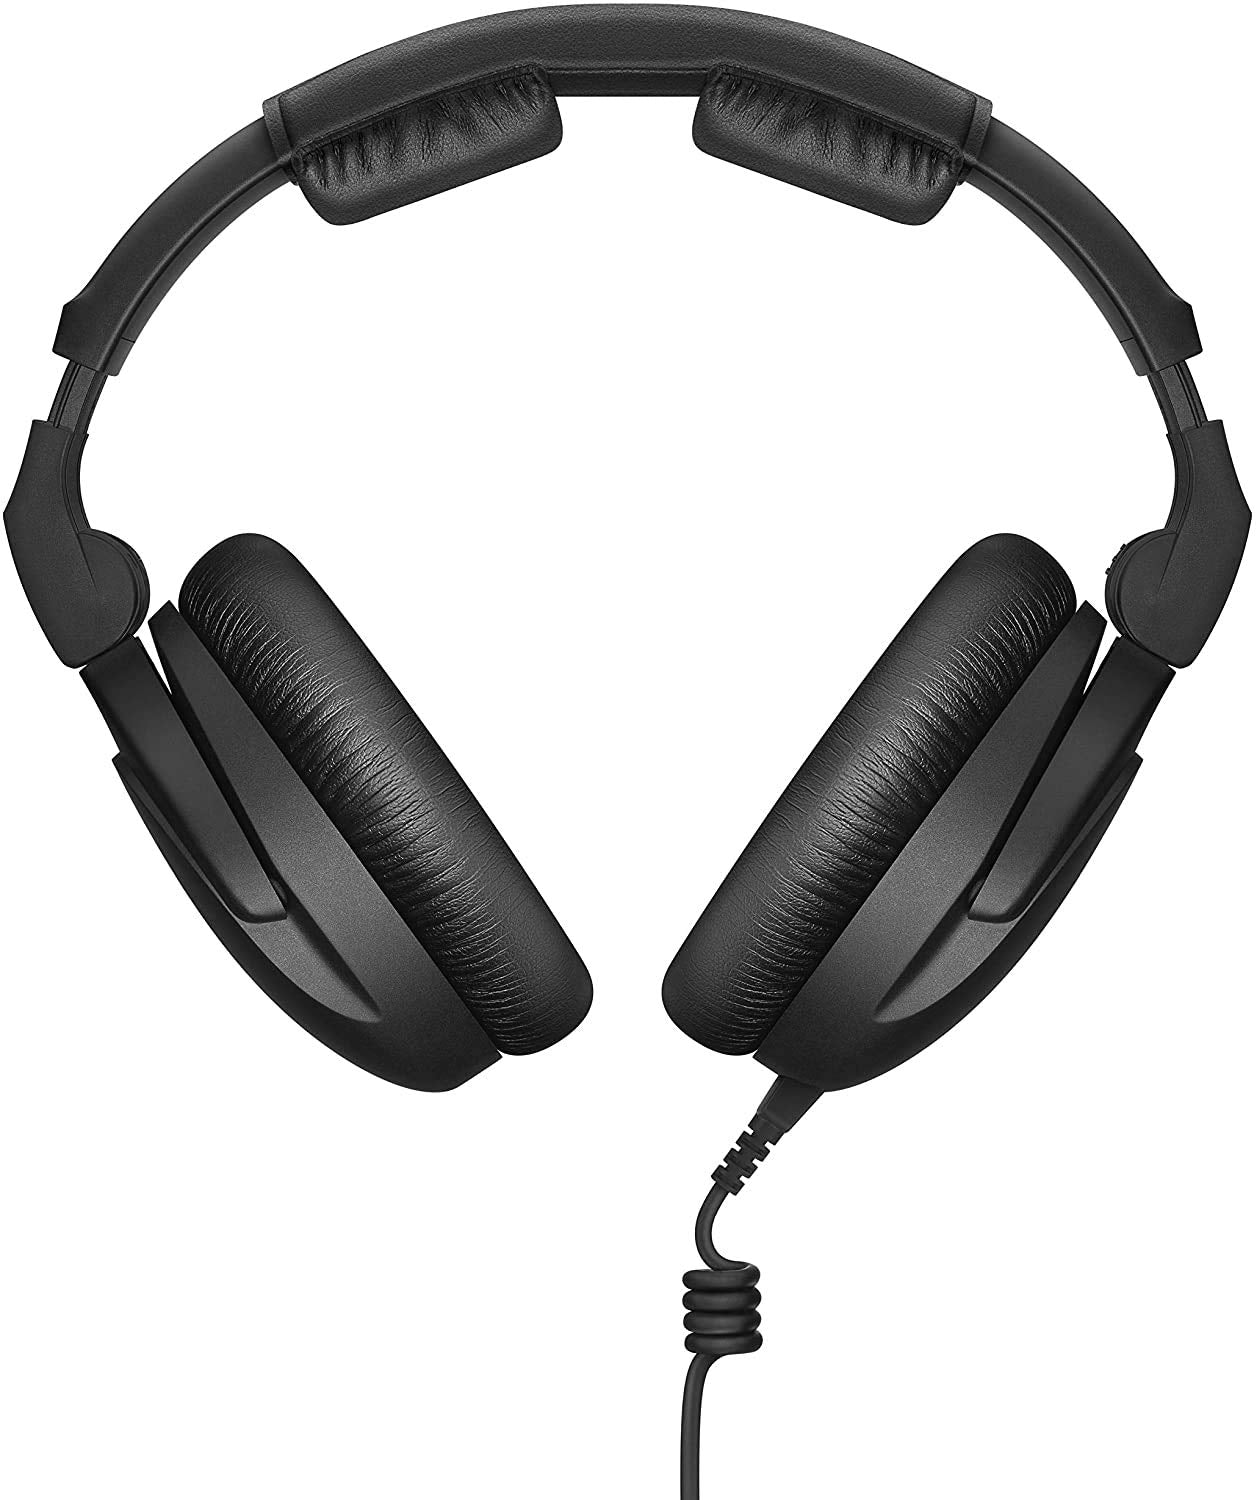 Sennheiser Professional Audio HD 300 PROtect Wired